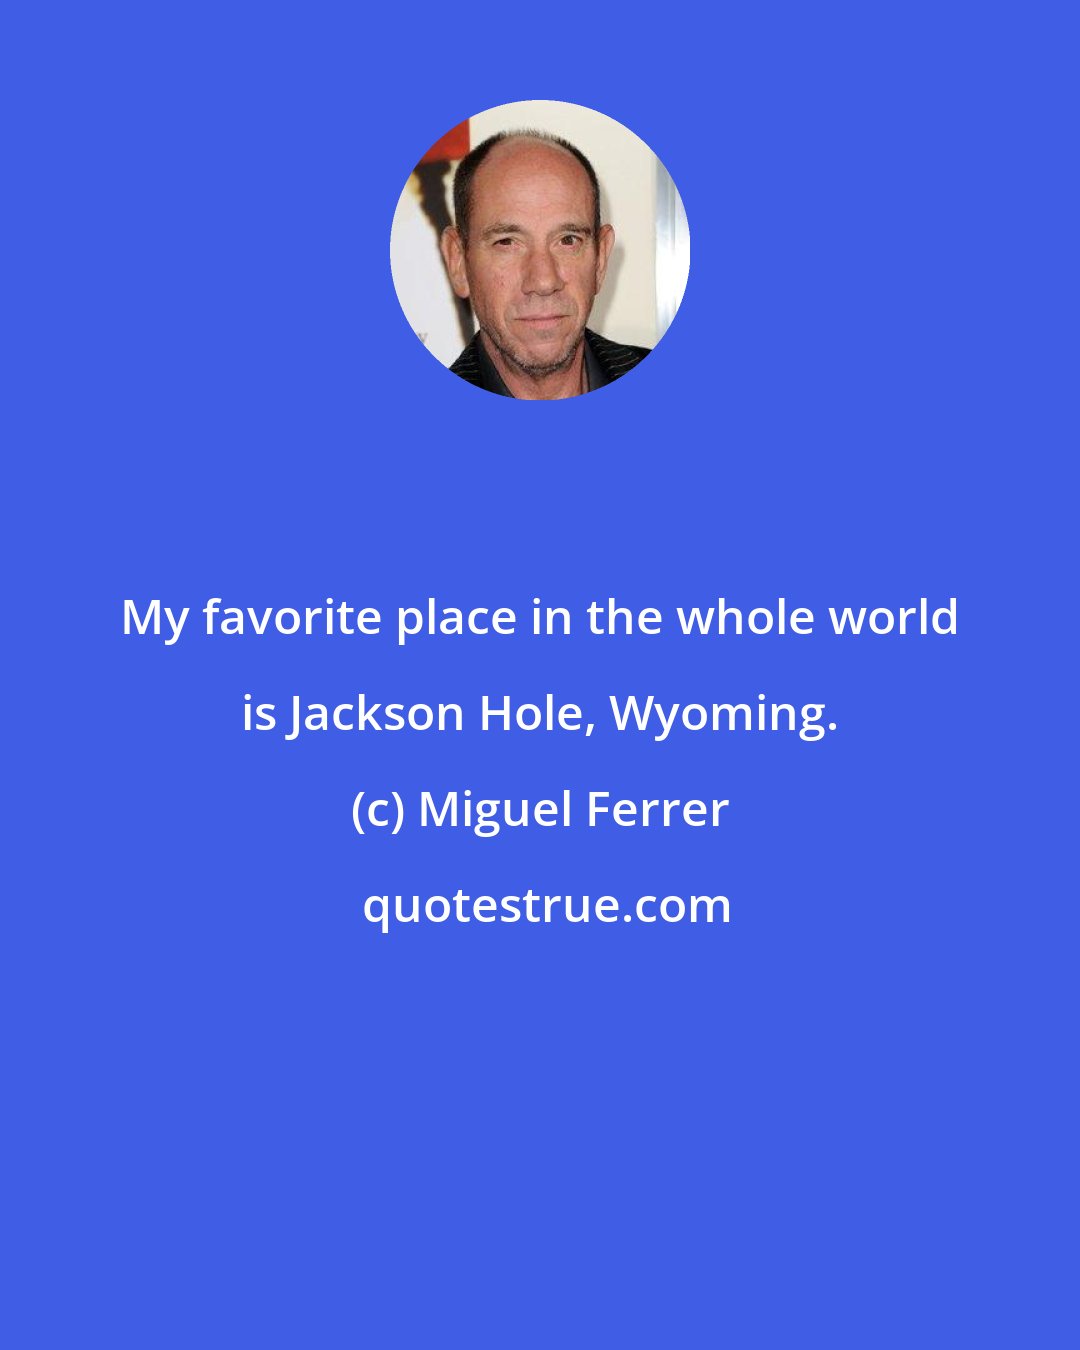 Miguel Ferrer: My favorite place in the whole world is Jackson Hole, Wyoming.